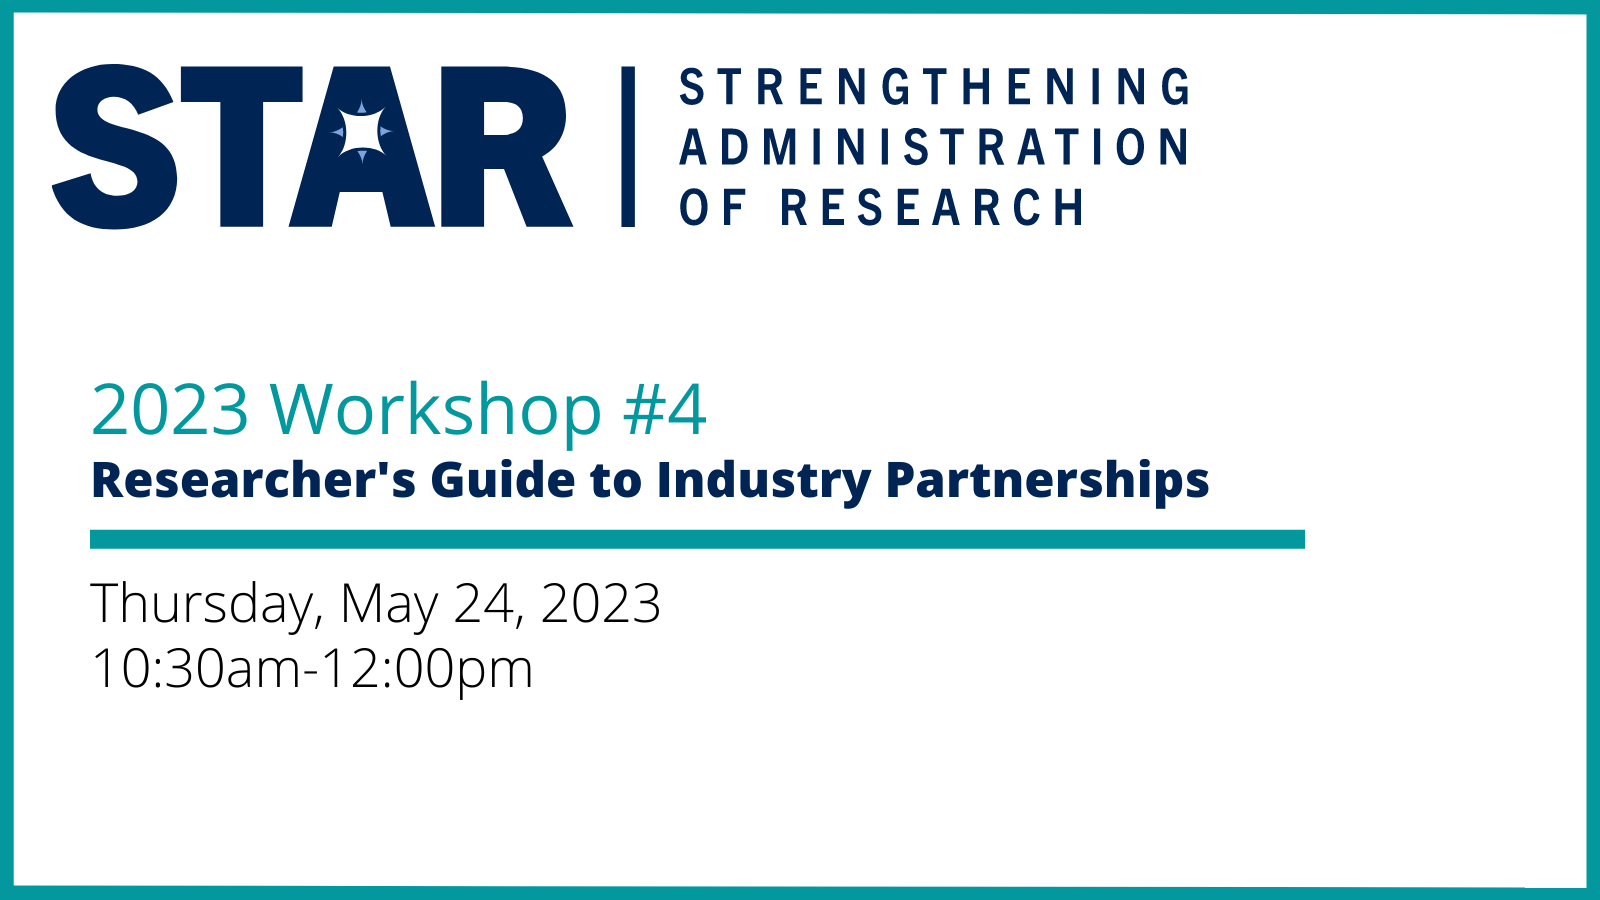 This image is a poster for this session with the title, date, and wordmark for the STAR, Strengthening Administration of Research.